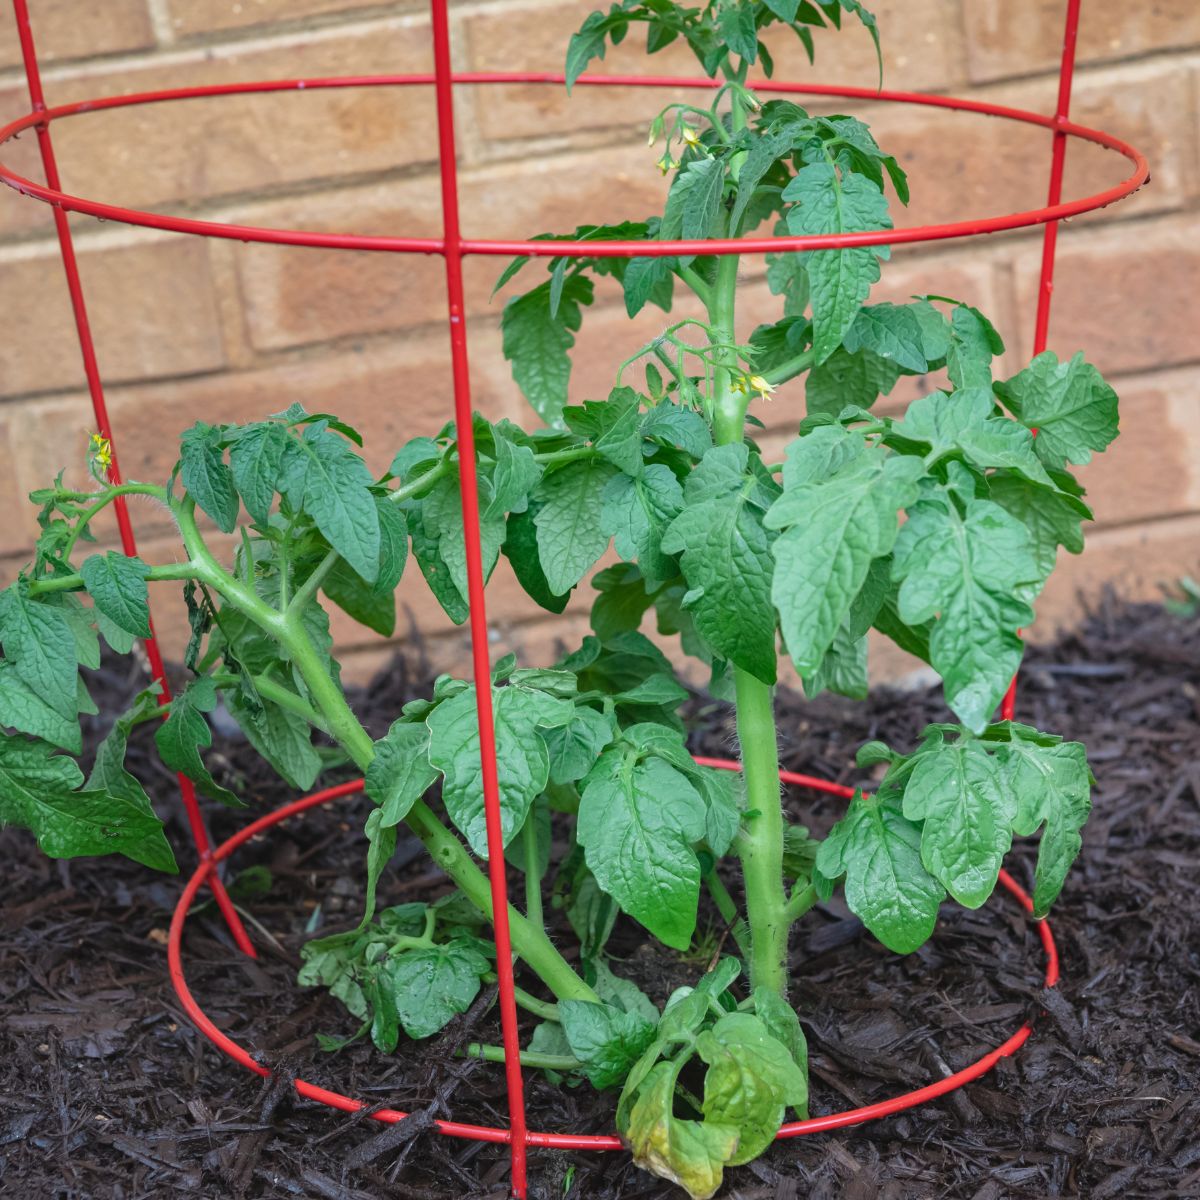 A red metal cage places around a tomato plant 